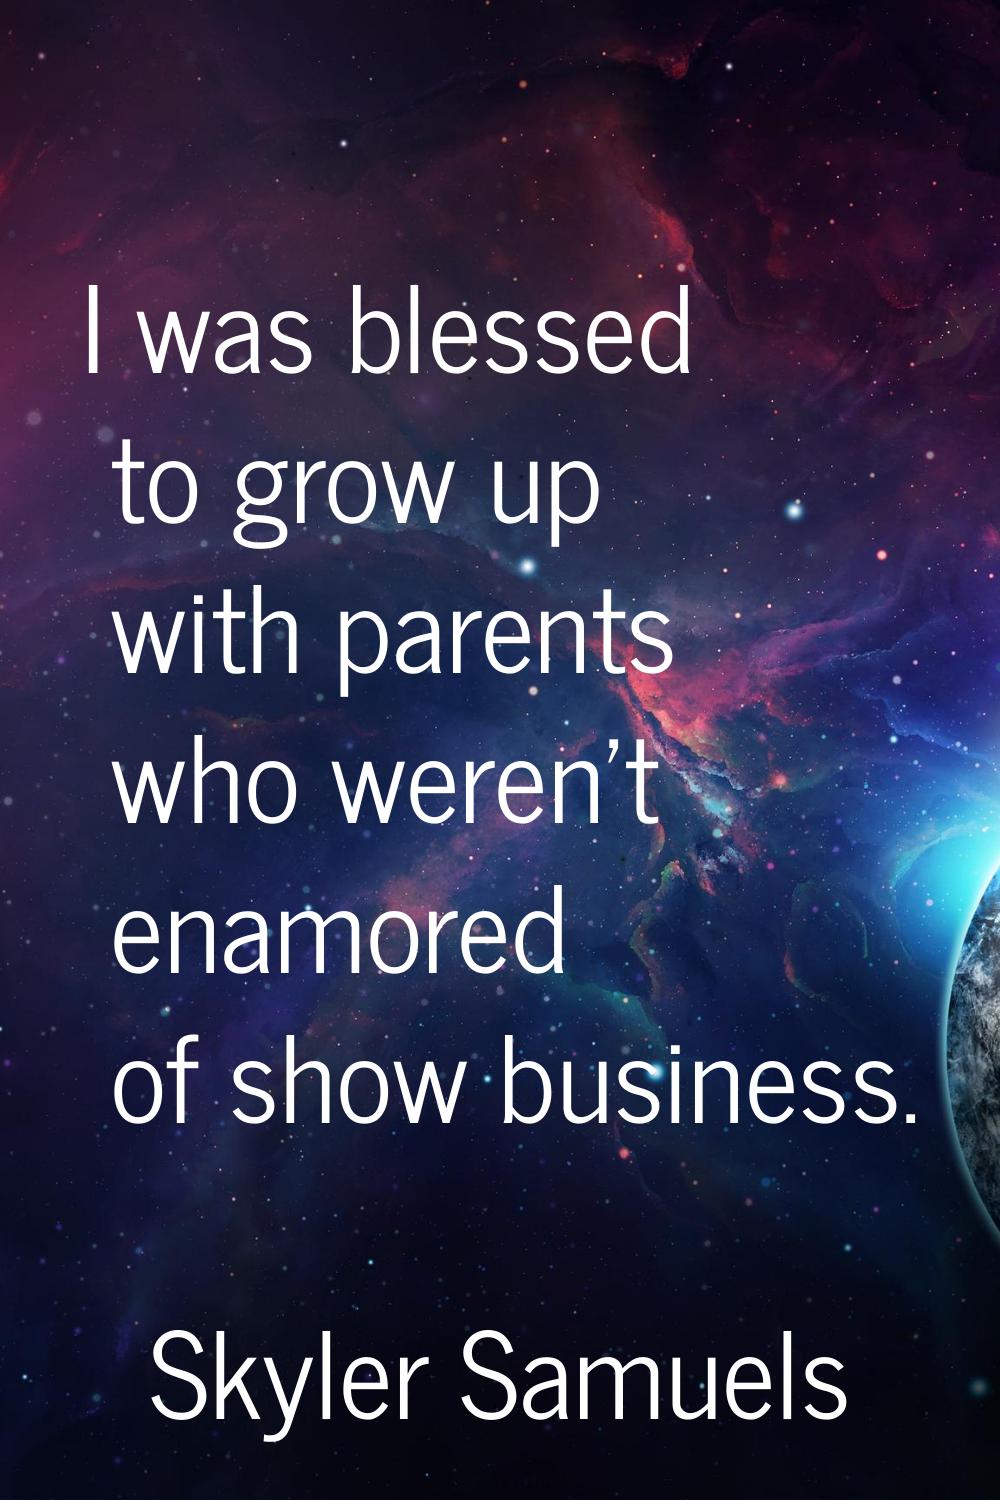 I was blessed to grow up with parents who weren't enamored of show business.